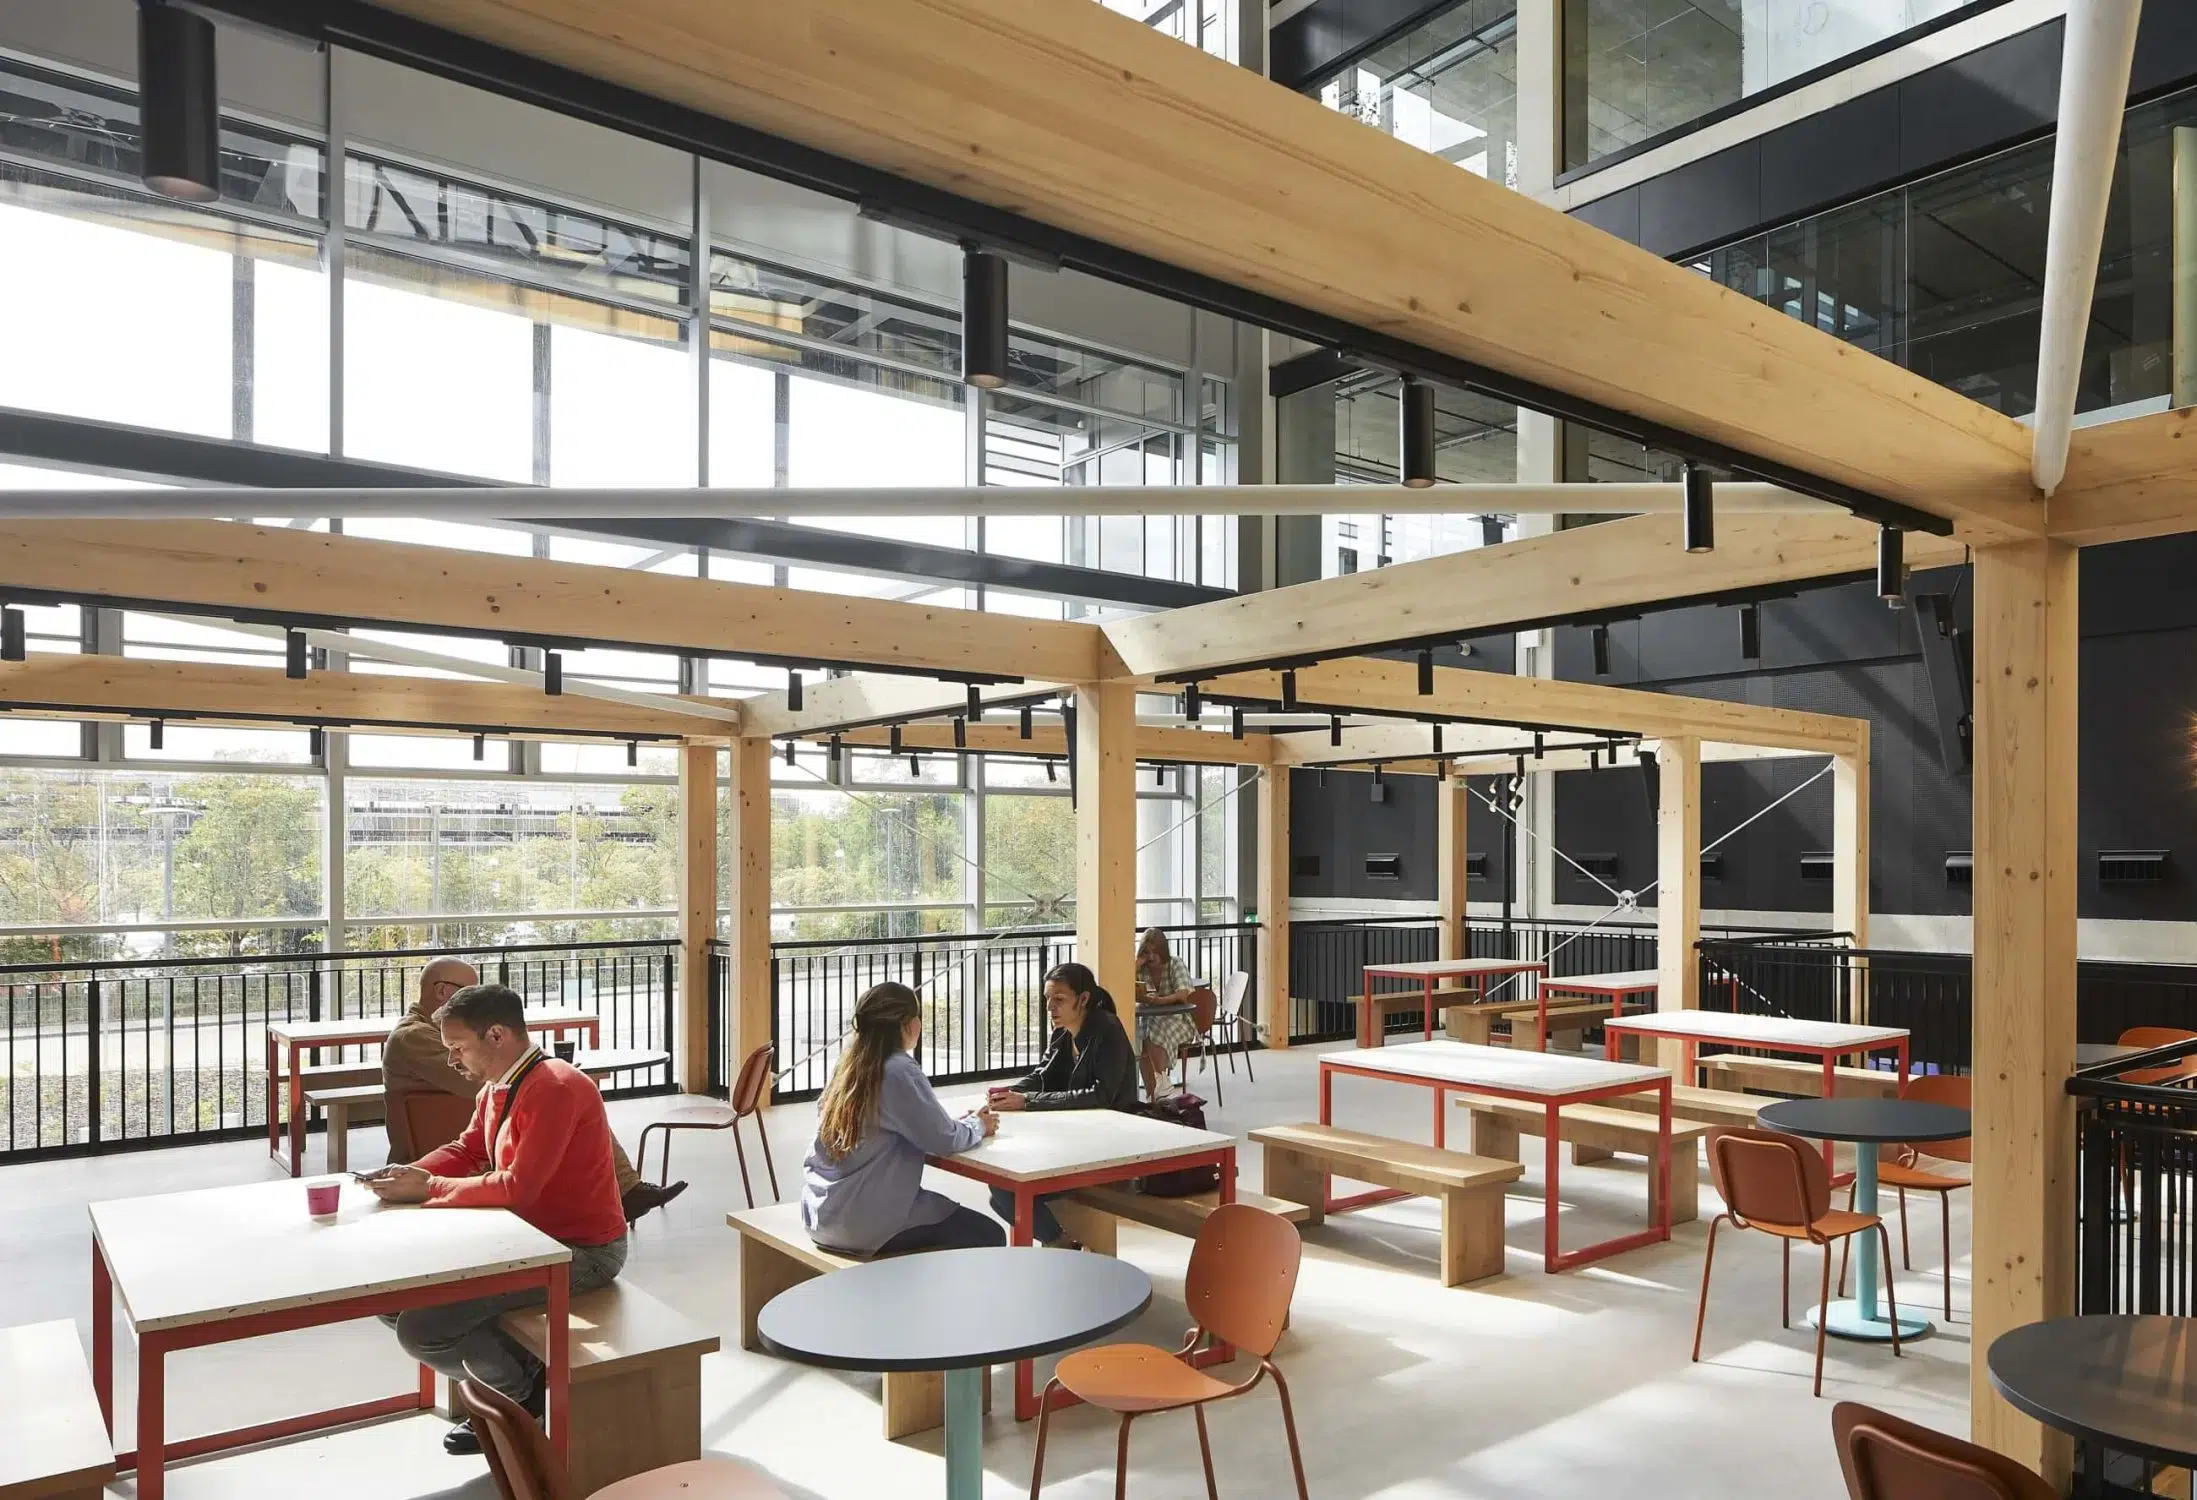 people sitting at wooden tables inside a building